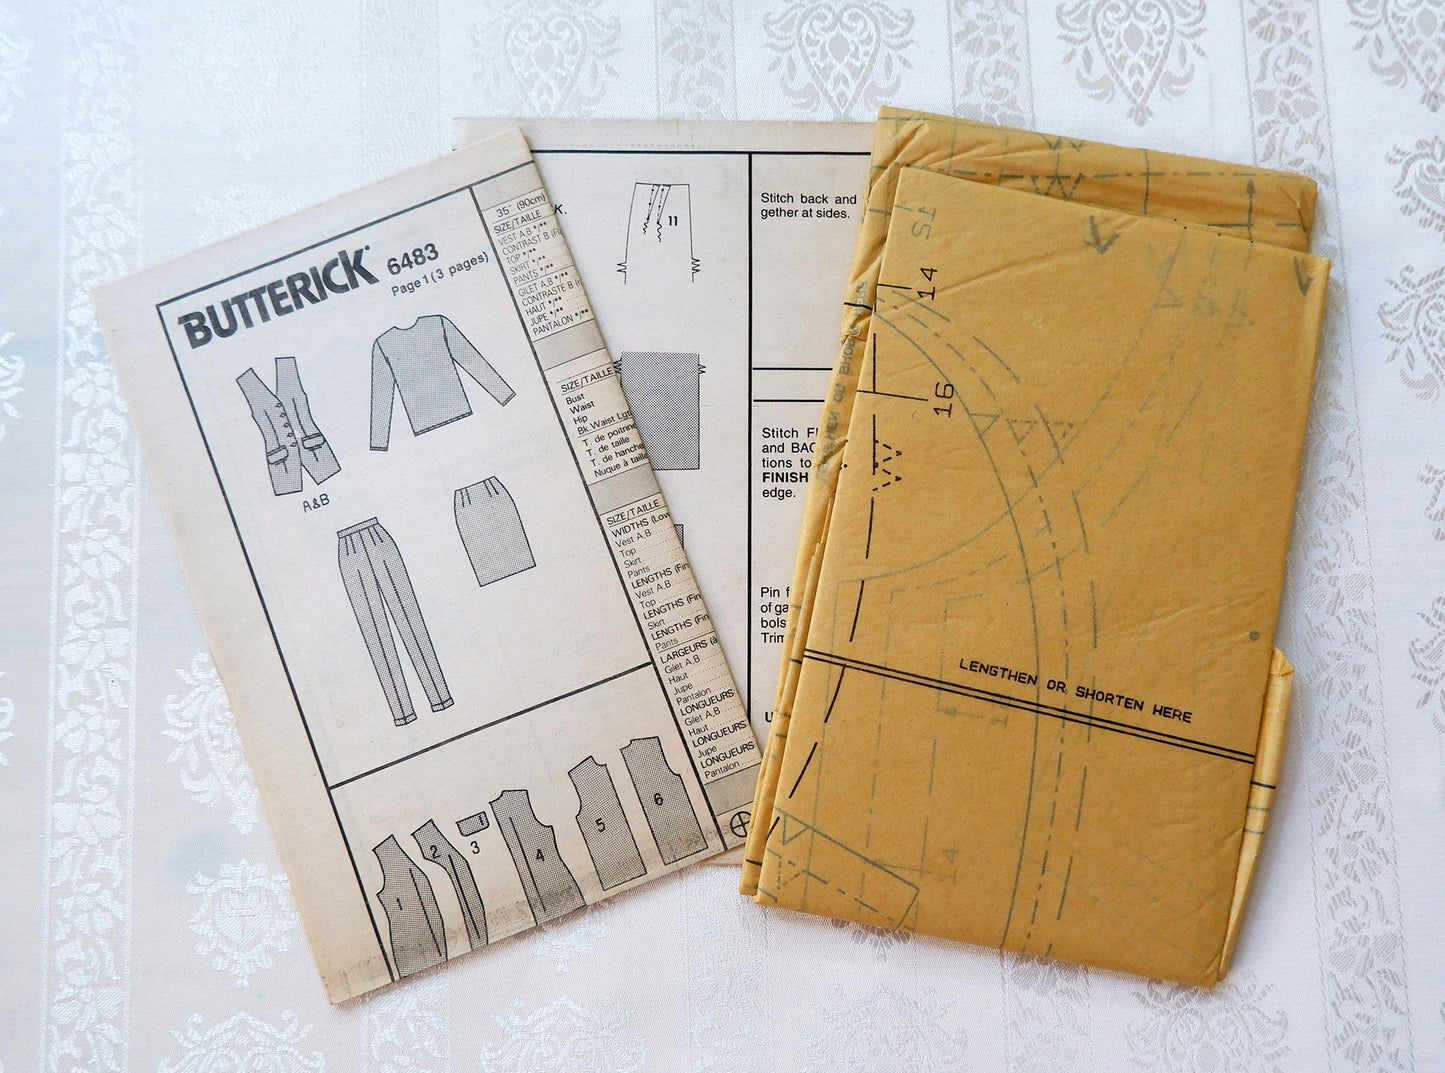 Butterick 6483, vest top skirt and pants , Sizes 12 - 16